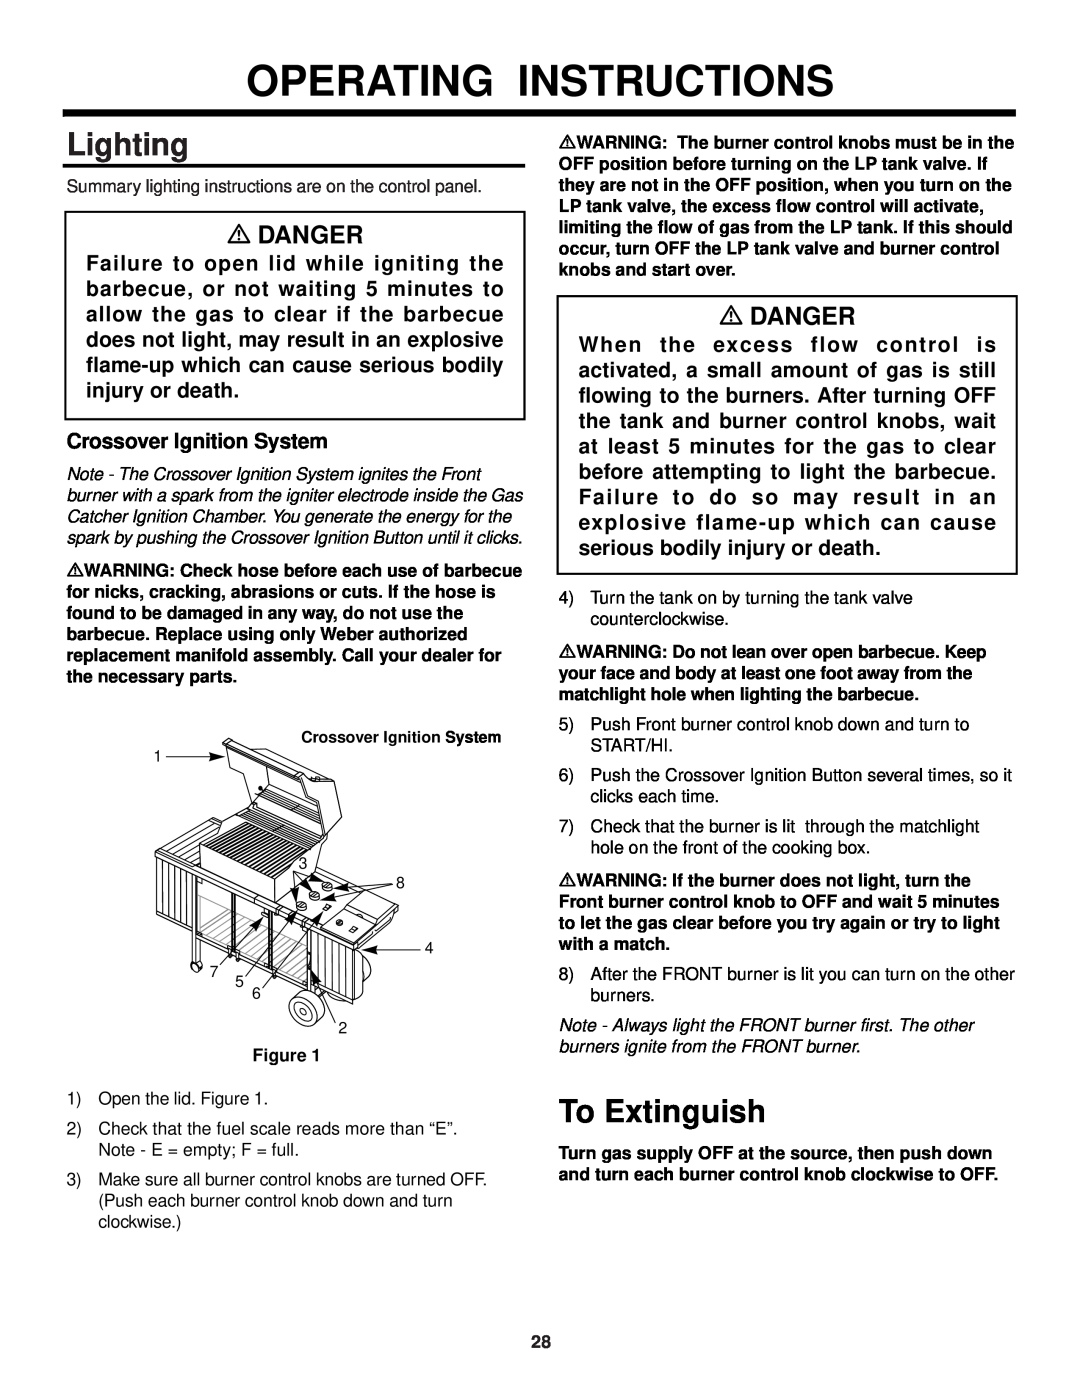 Weber 3400 Series owner manual Operating Instructions, Lighting, To Extinguish, mDANGER, Crossover Ignition System 